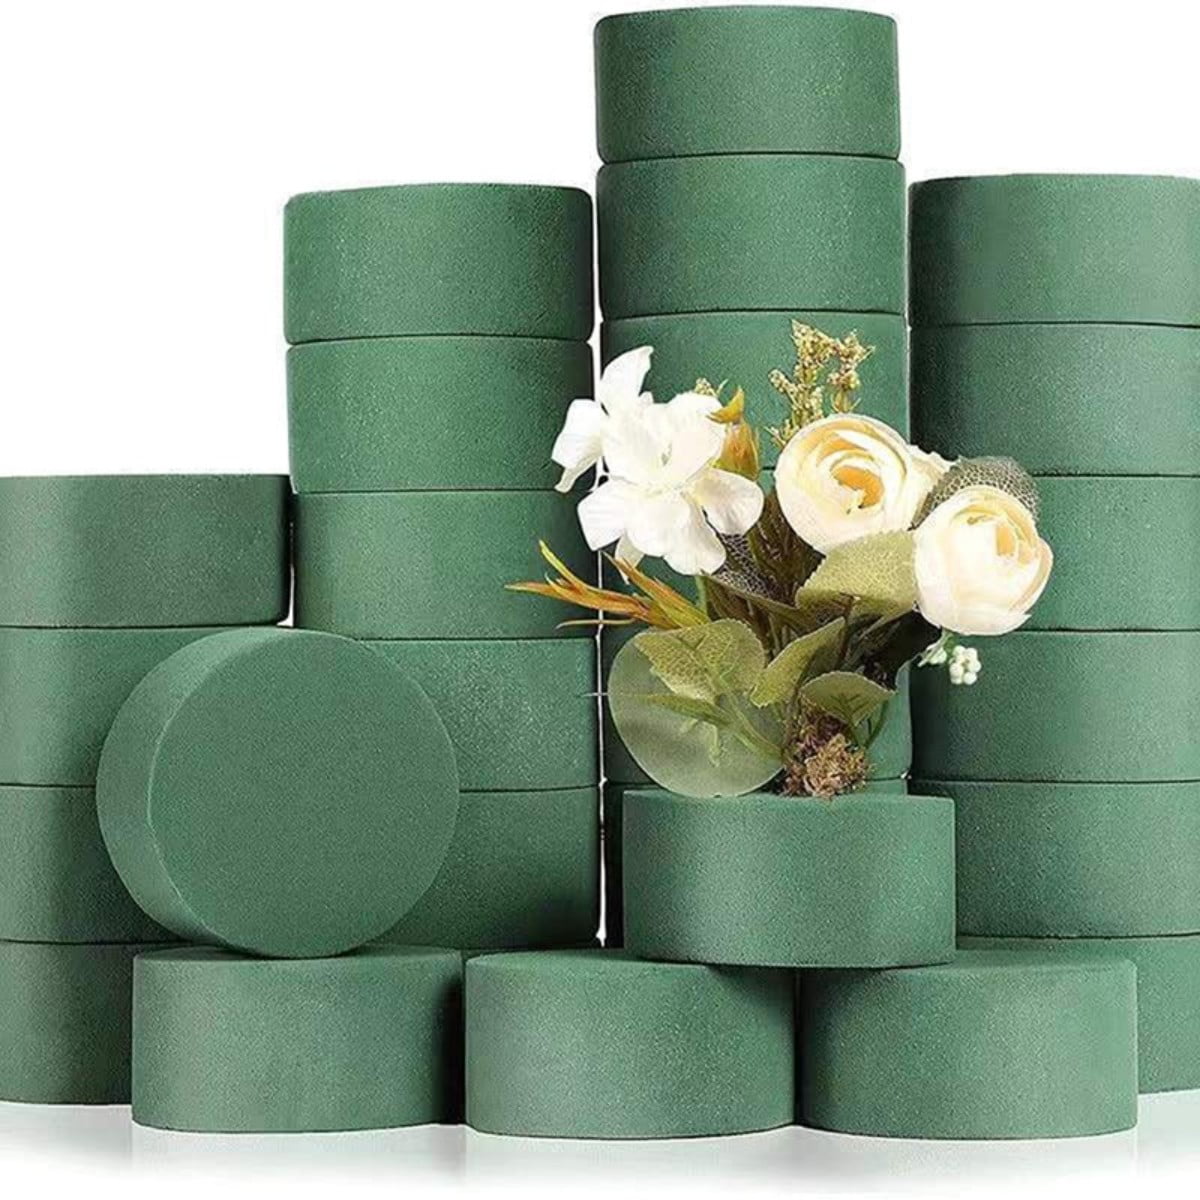 OJYUDD 20 Pcs Round Floral Foam,Green Wet Foam Block,Wet Florist Floral Foam Block Flower Arrangement Supplies for Wedding Aisle Flowers,Party